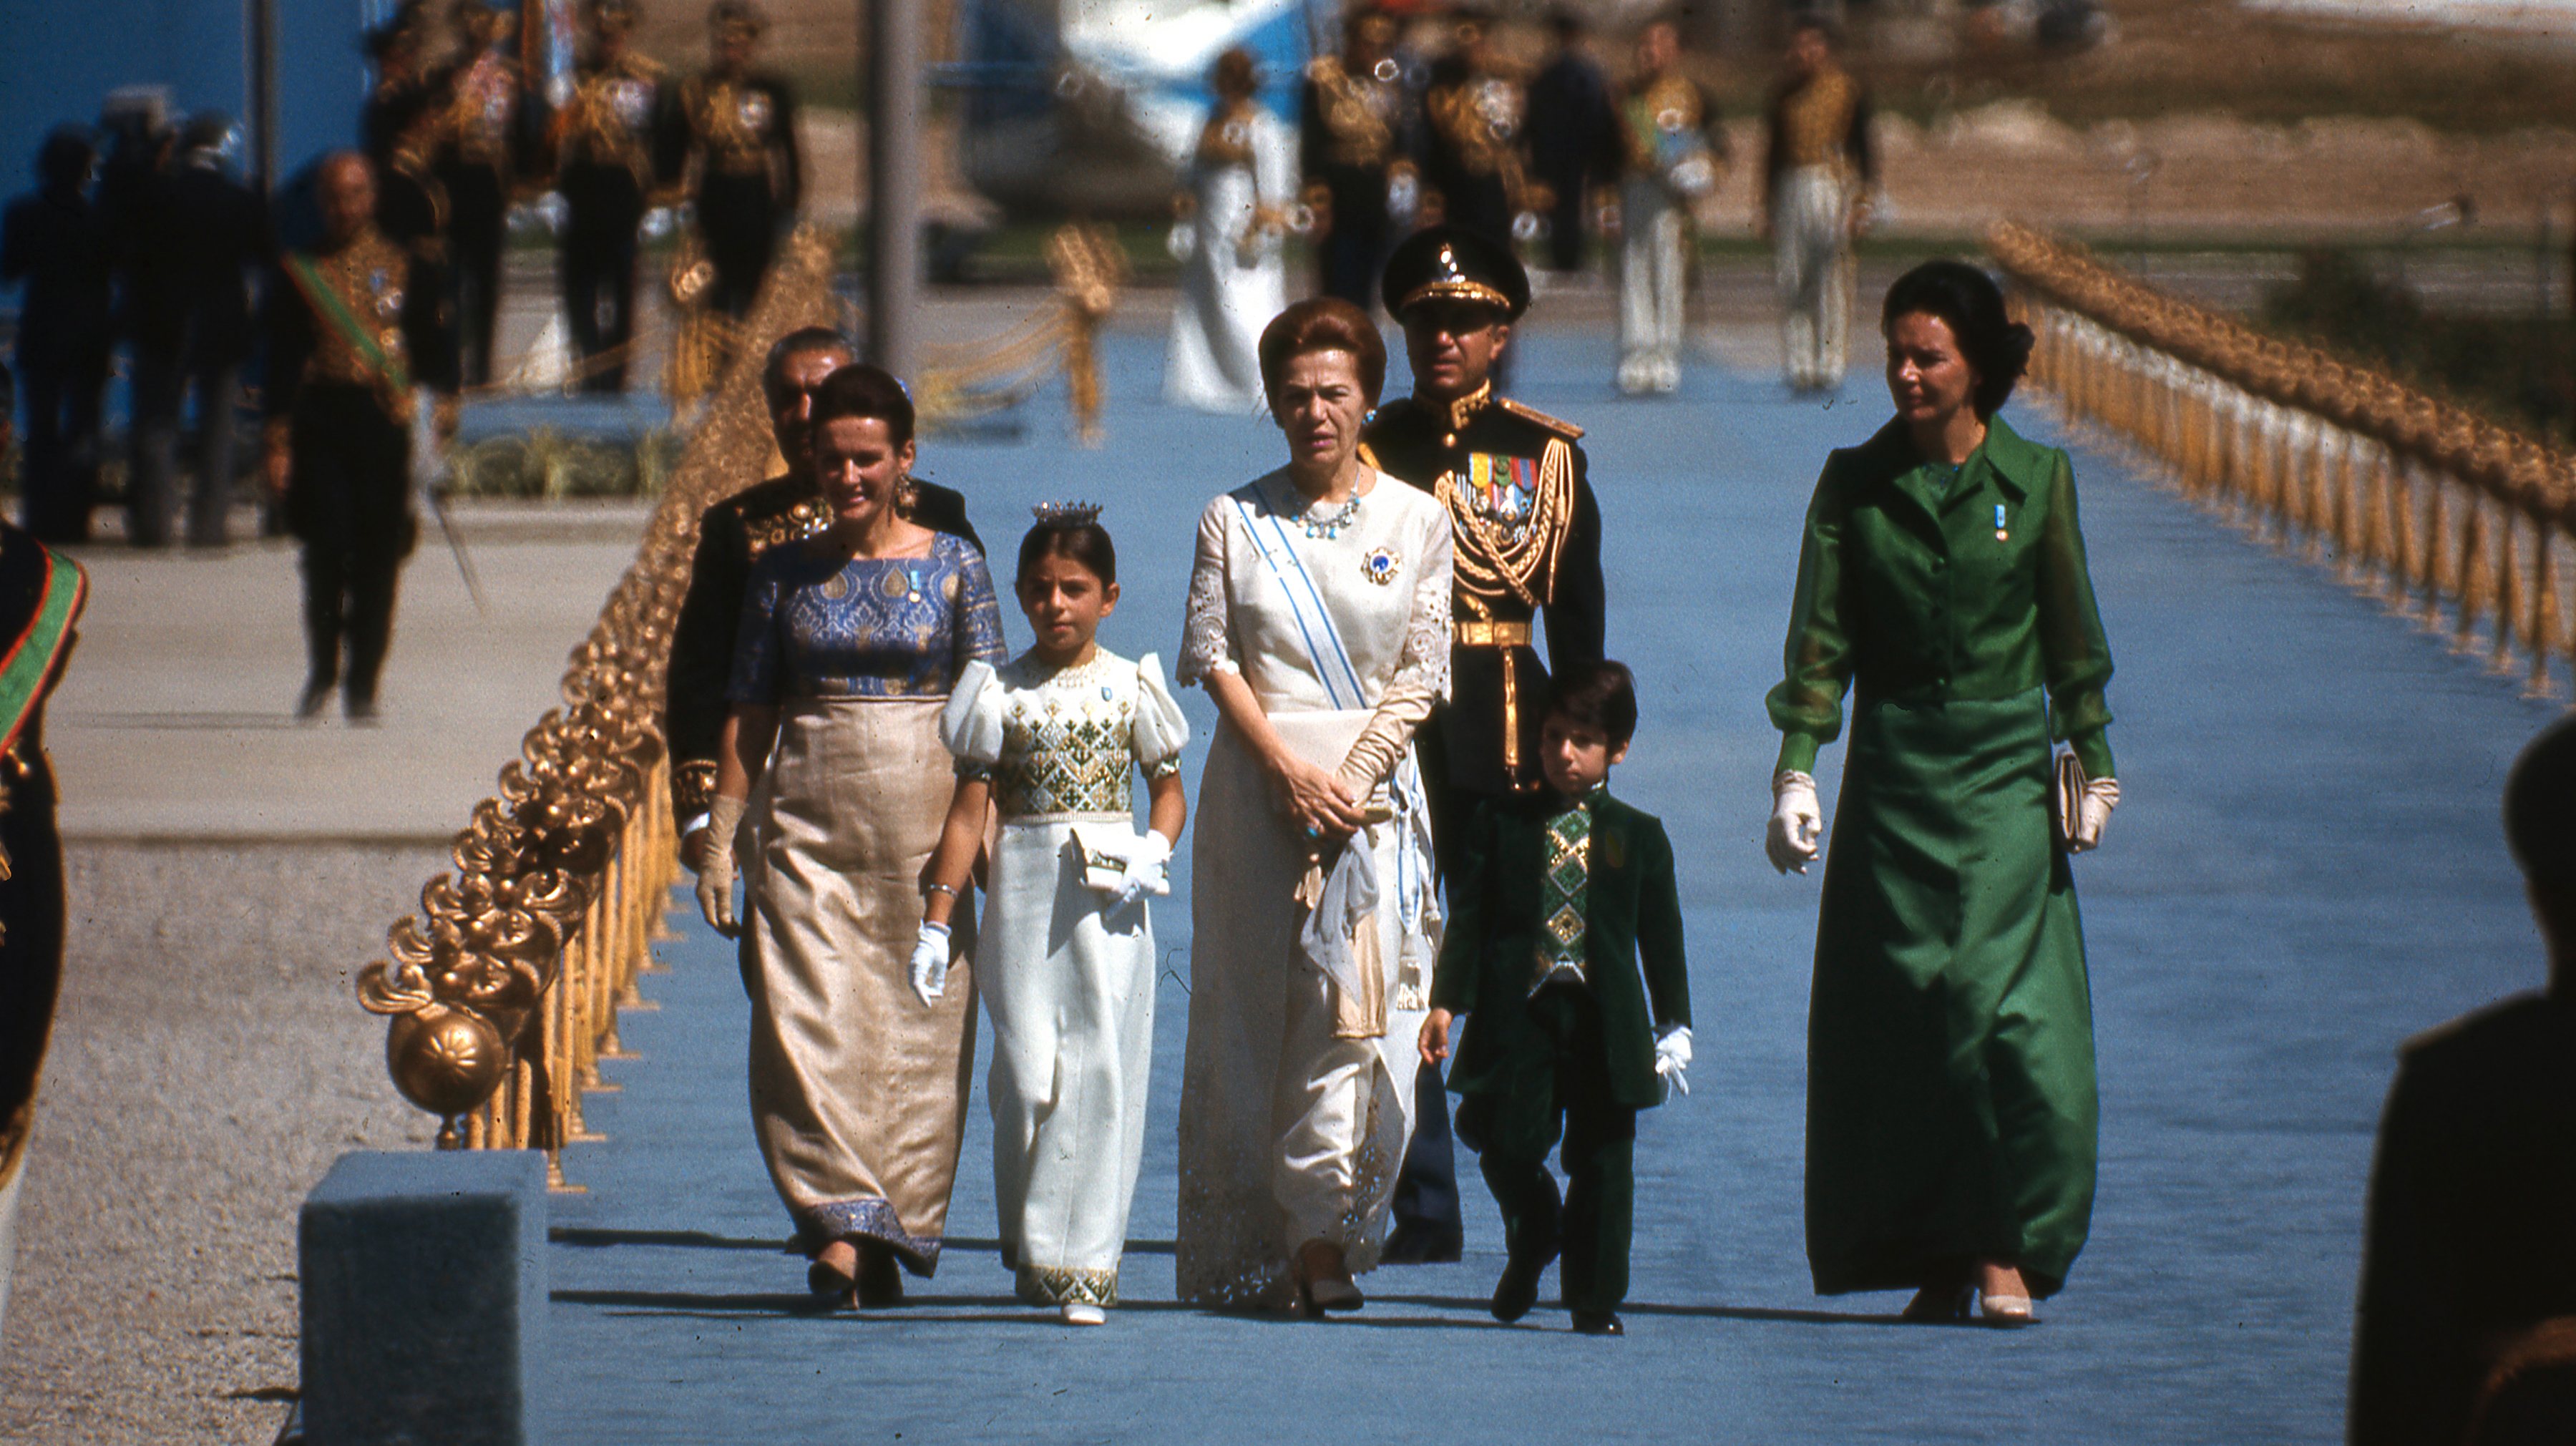 Shah of Iran&#039;s mother and children arrive in Persepolis for celebration of 2500th anniversary of founding of Iranian Empire in trent city erected in ruins of Persepolis and attended by foreign dignitaries in October 1971.